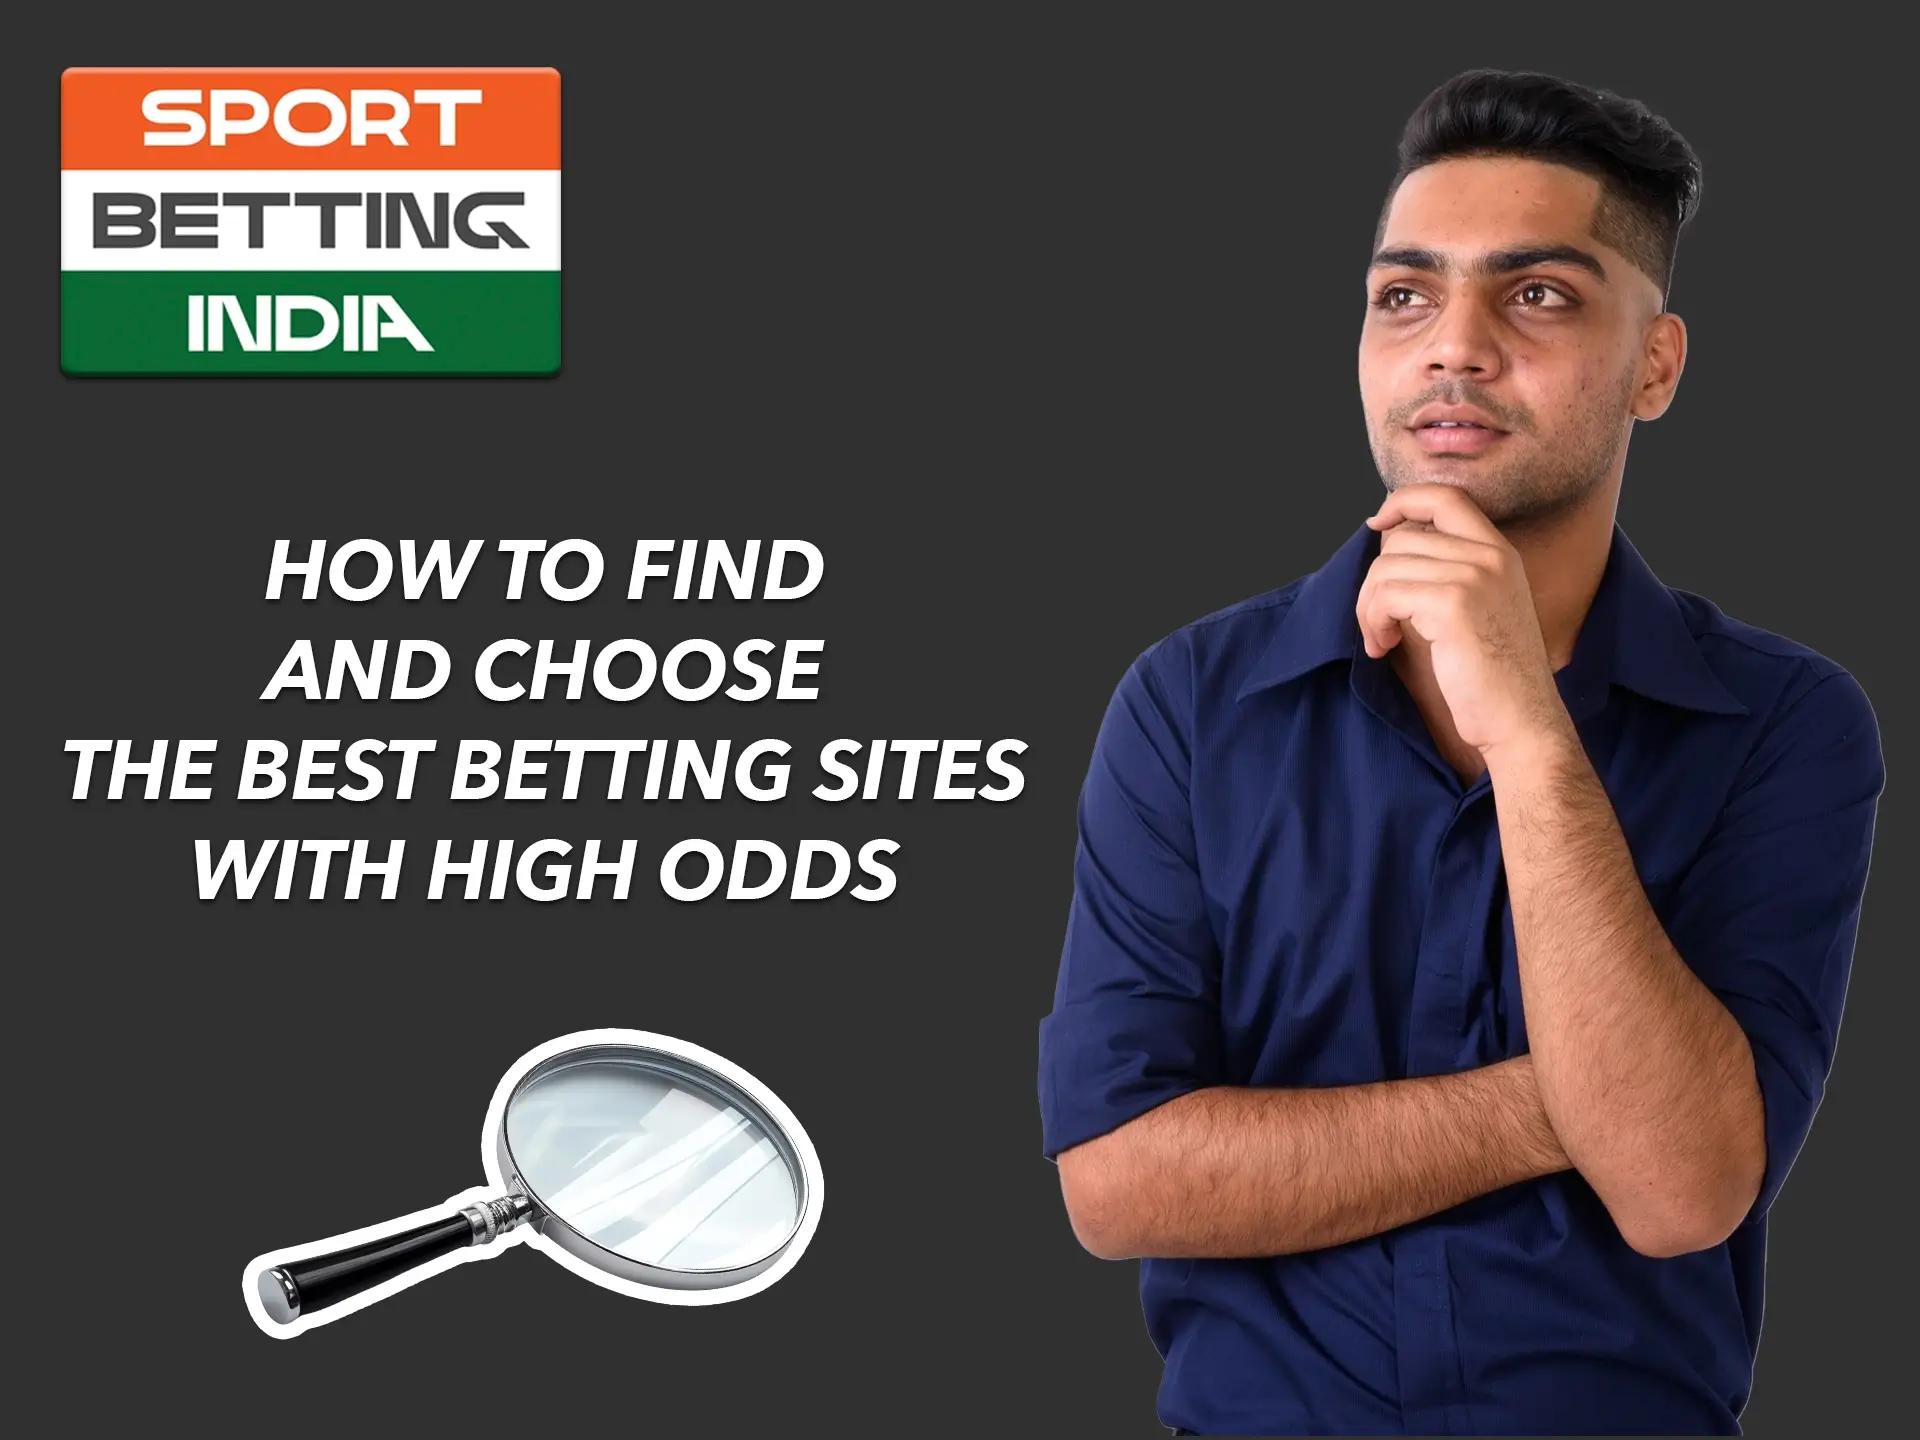 Use the parameters that are meaningful to you when selecting the best sports bookmakers.